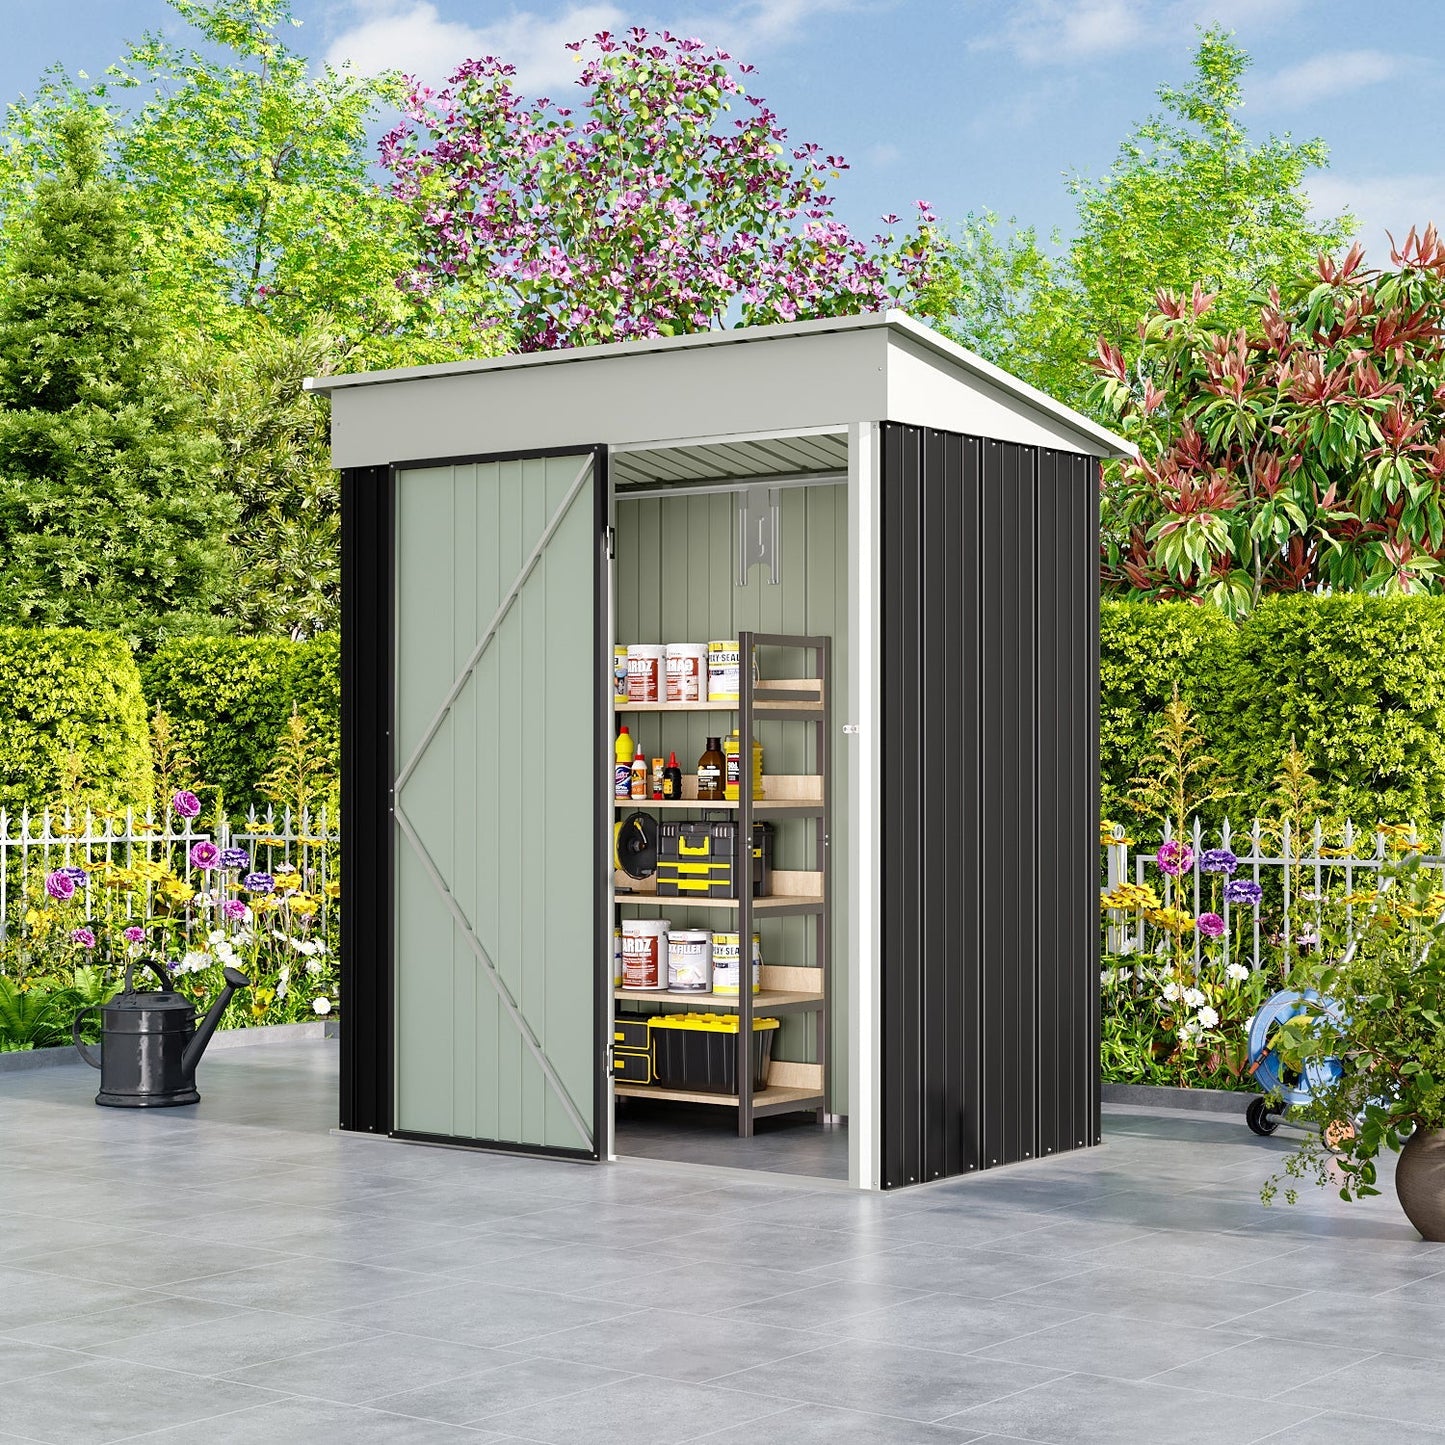 Lockable Zinc Steel Storage Shed with Built-In Shelving